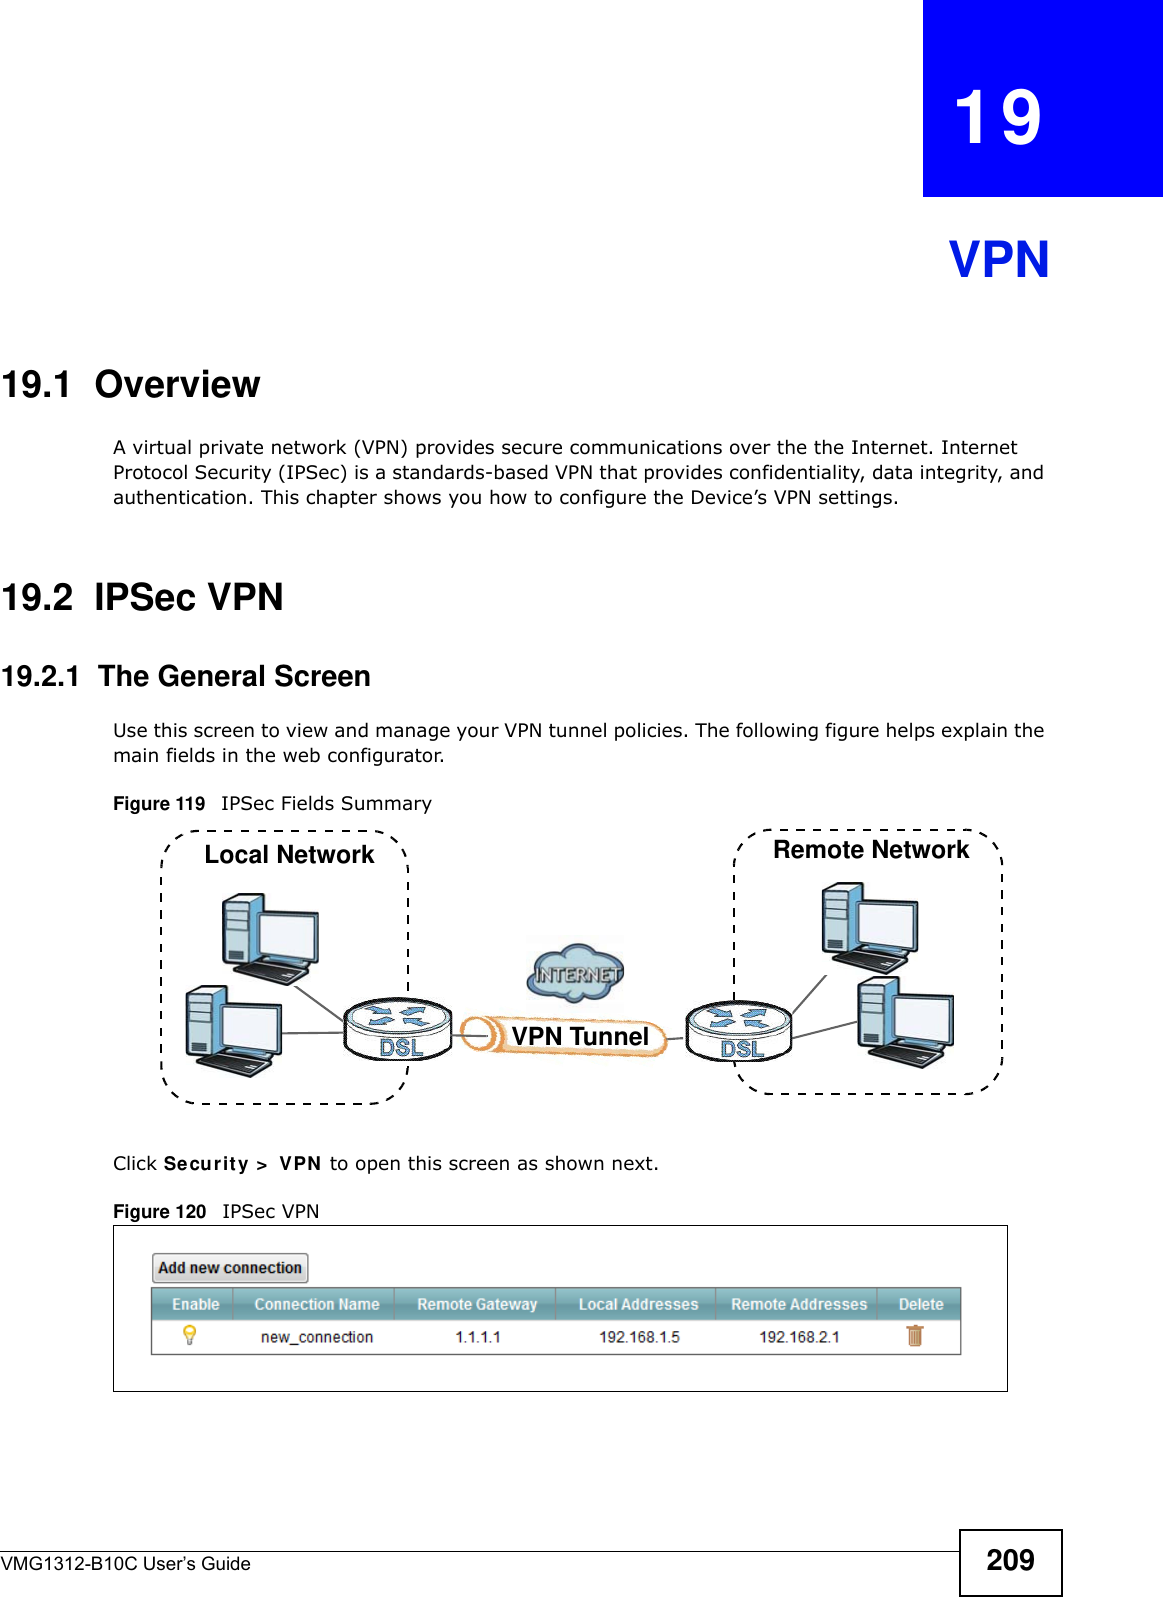 VMG1312-B10C User’s Guide 209CHAPTER   19VPN19.1  OverviewA virtual private network (VPN) provides secure communications over the the Internet. Internet Protocol Security (IPSec) is a standards-based VPN that provides confidentiality, data integrity, and authentication. This chapter shows you how to configure the Device’s VPN settings.19.2  IPSec VPN19.2.1  The General ScreenUse this screen to view and manage your VPN tunnel policies. The following figure helps explain the main fields in the web configurator. Figure 119   IPSec Fields SummaryClick Se cur it y &gt;  V PN  to open this screen as shown next.Figure 120   IPSec VPNLocal Network Remote NetworkVPN Tunnel